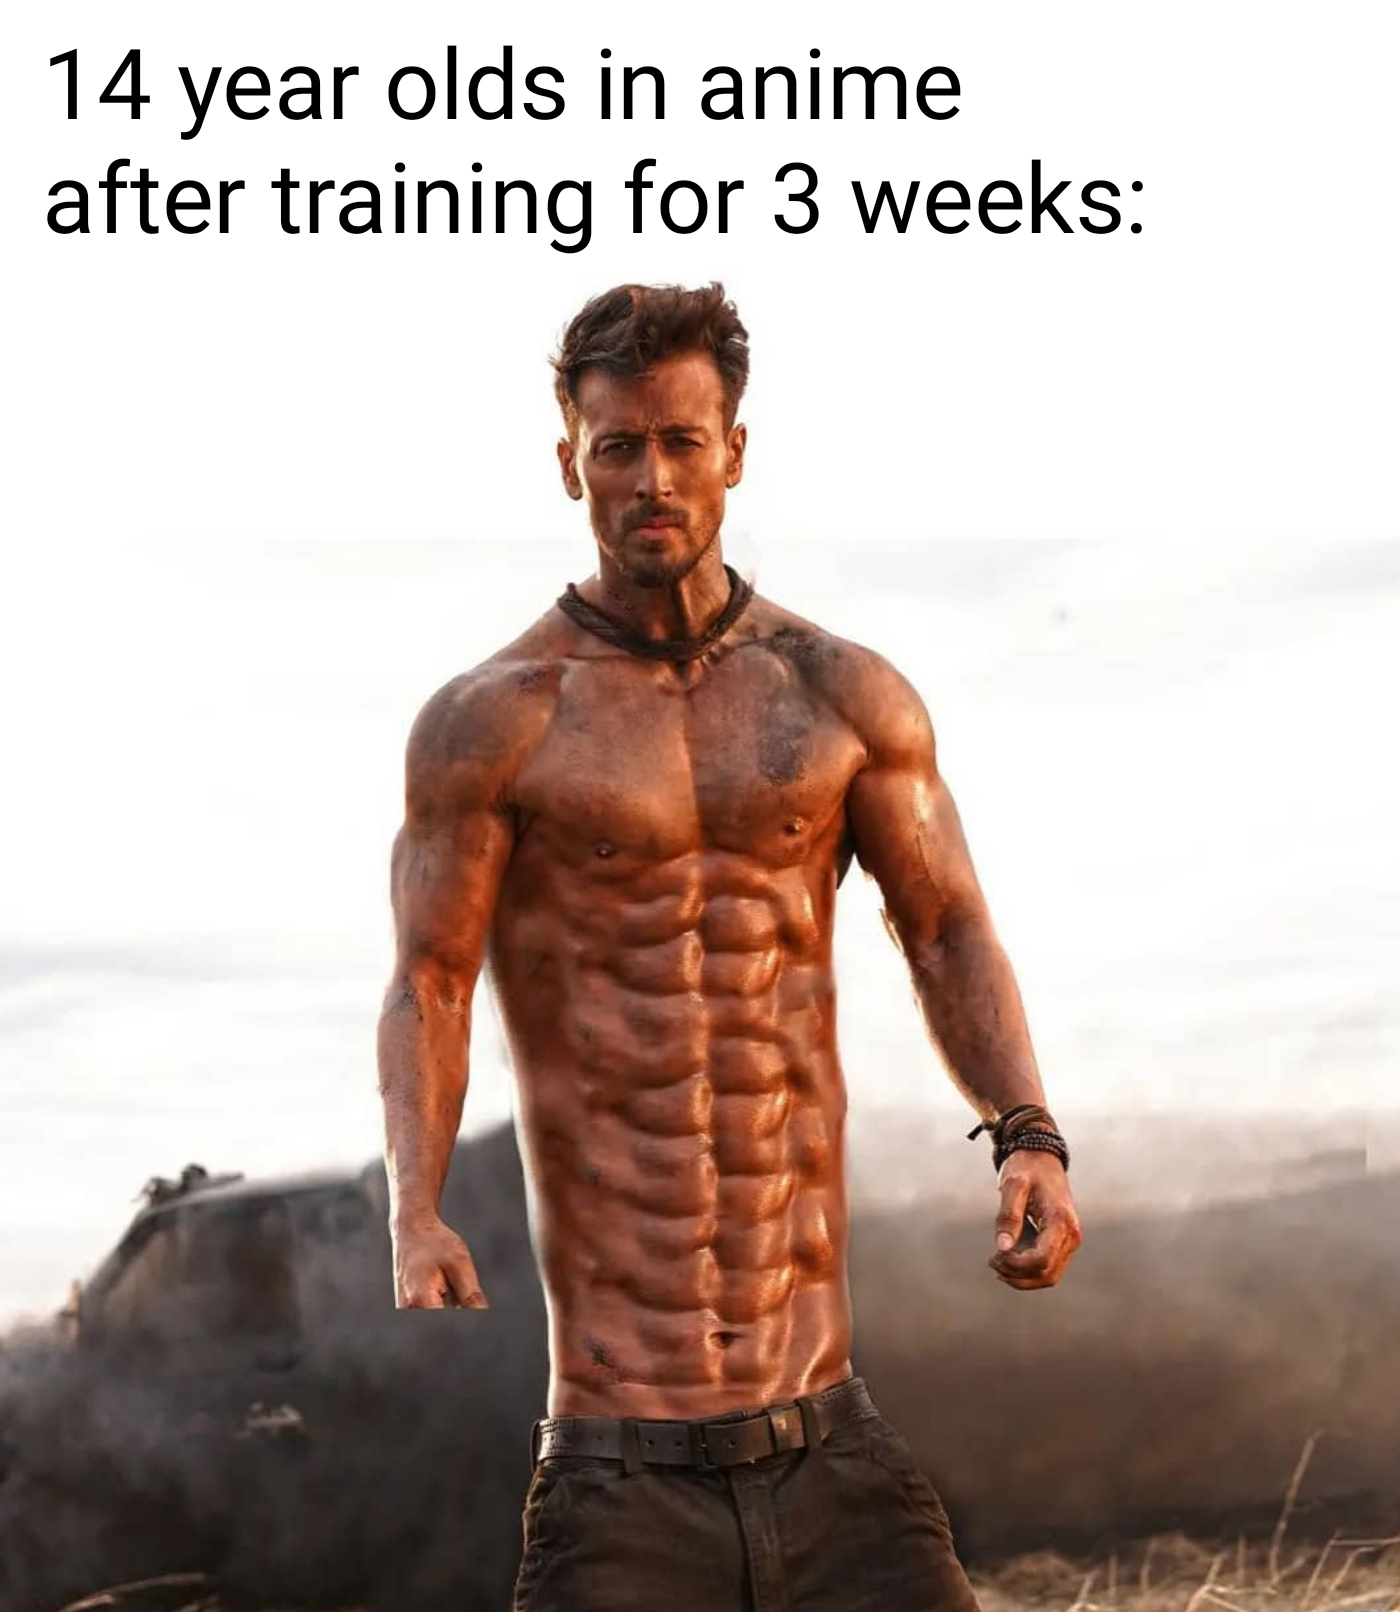 dank memes - bodybuilder - 14 year olds in anime after training for 3 weeks